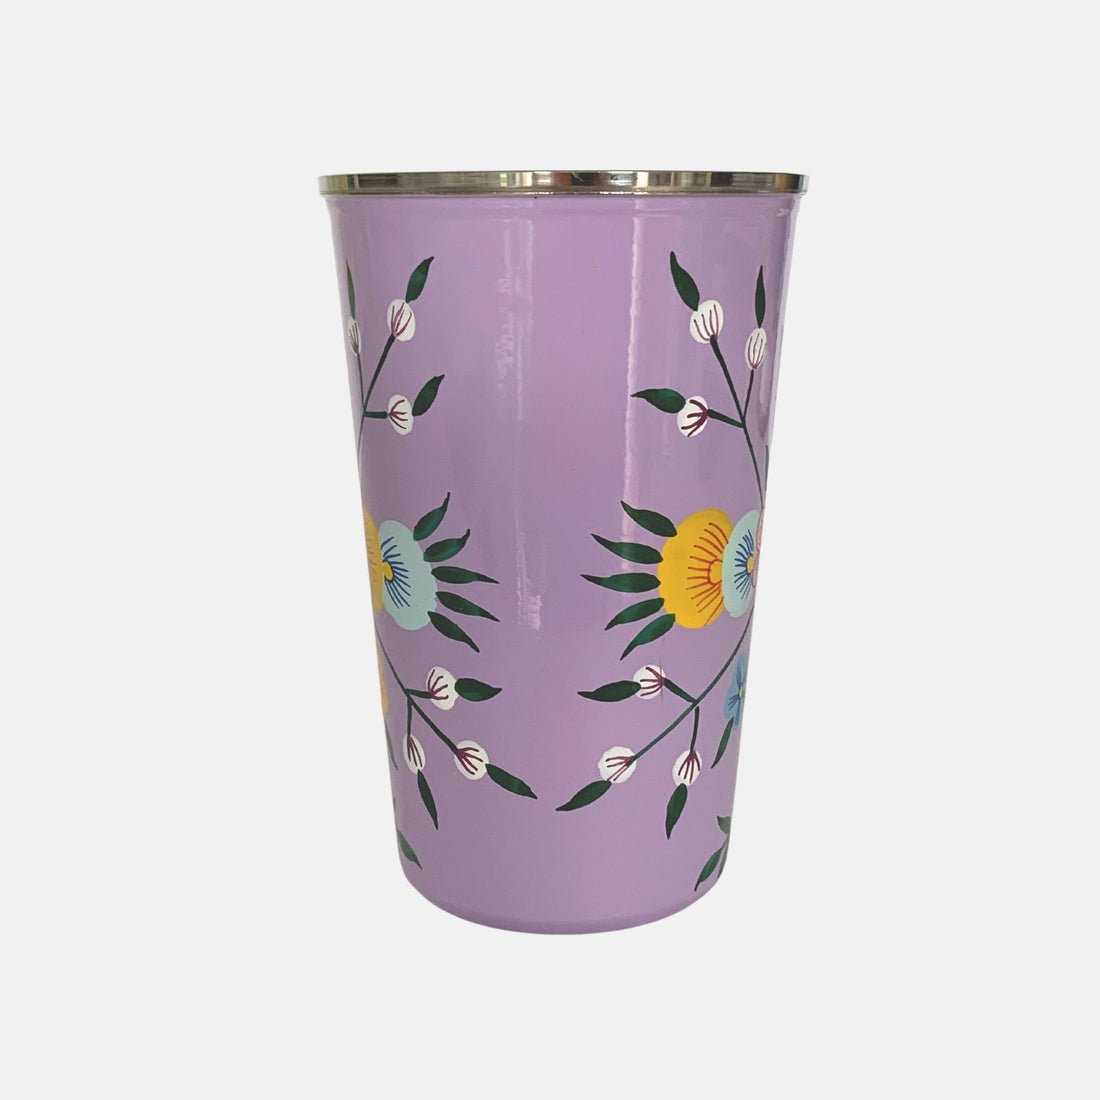 Table and Kitchen fair trade ethical sustainable fashion Hand Painted Tumblers - Lilac Burst conscious purchase Fair Go Trading